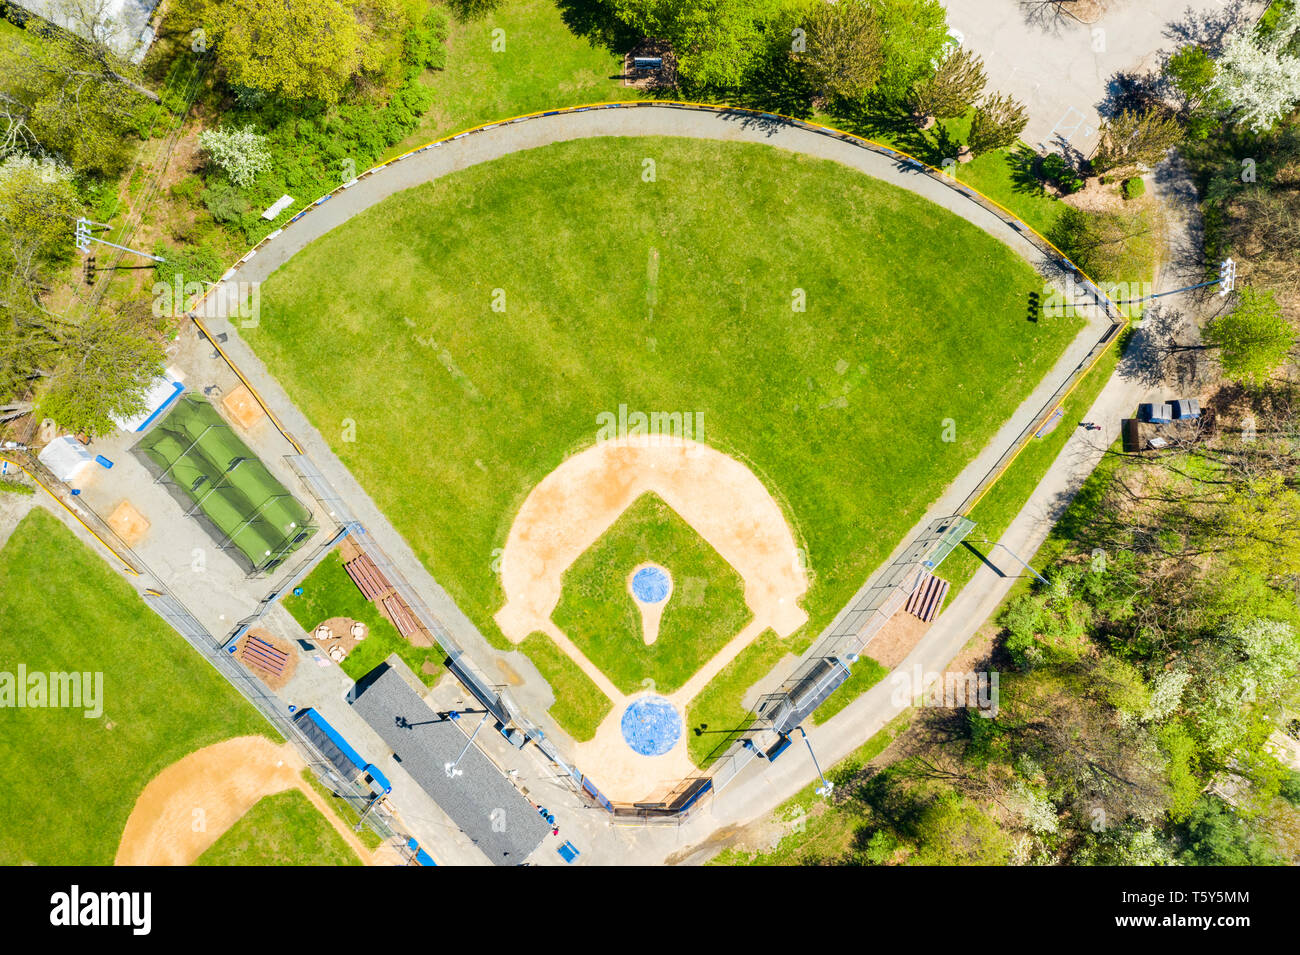 Top view of a baseball field Stock Photo